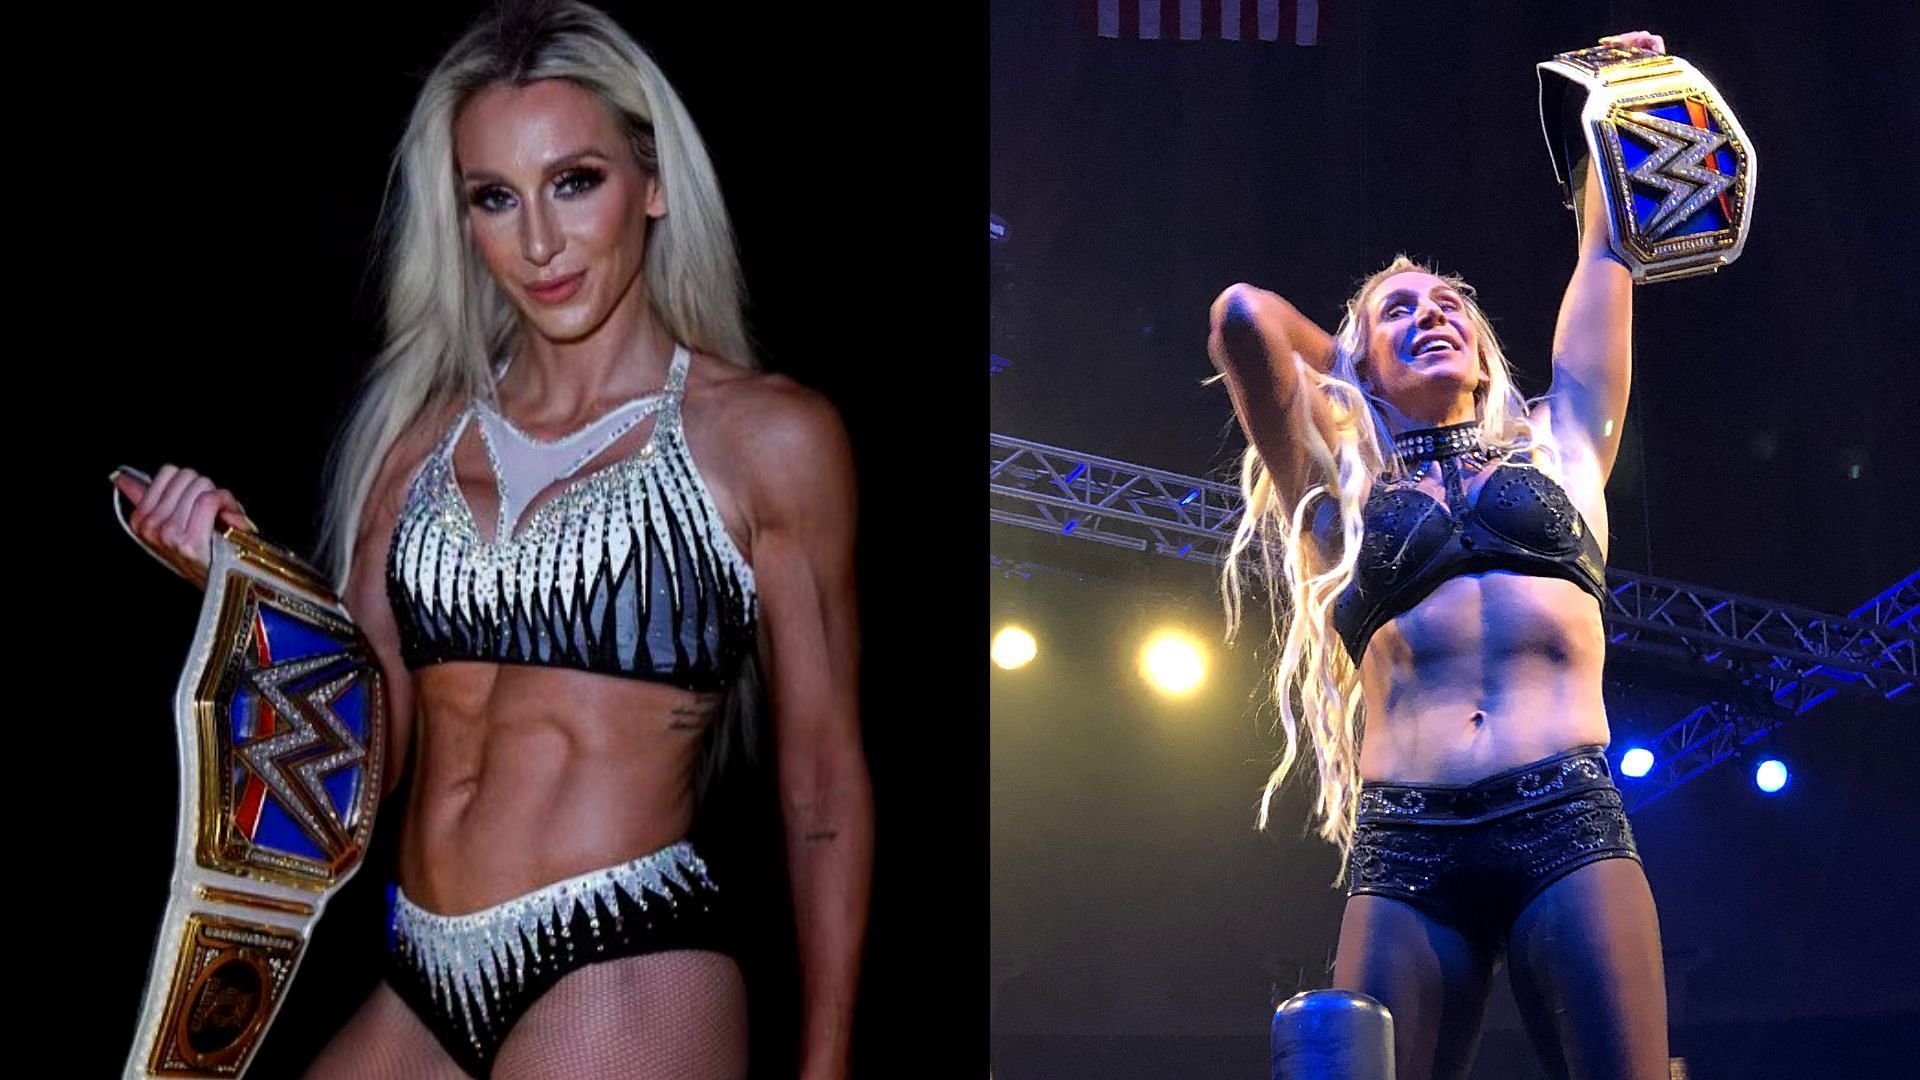 Charlotte Flair is the current WWE SmackDown Women